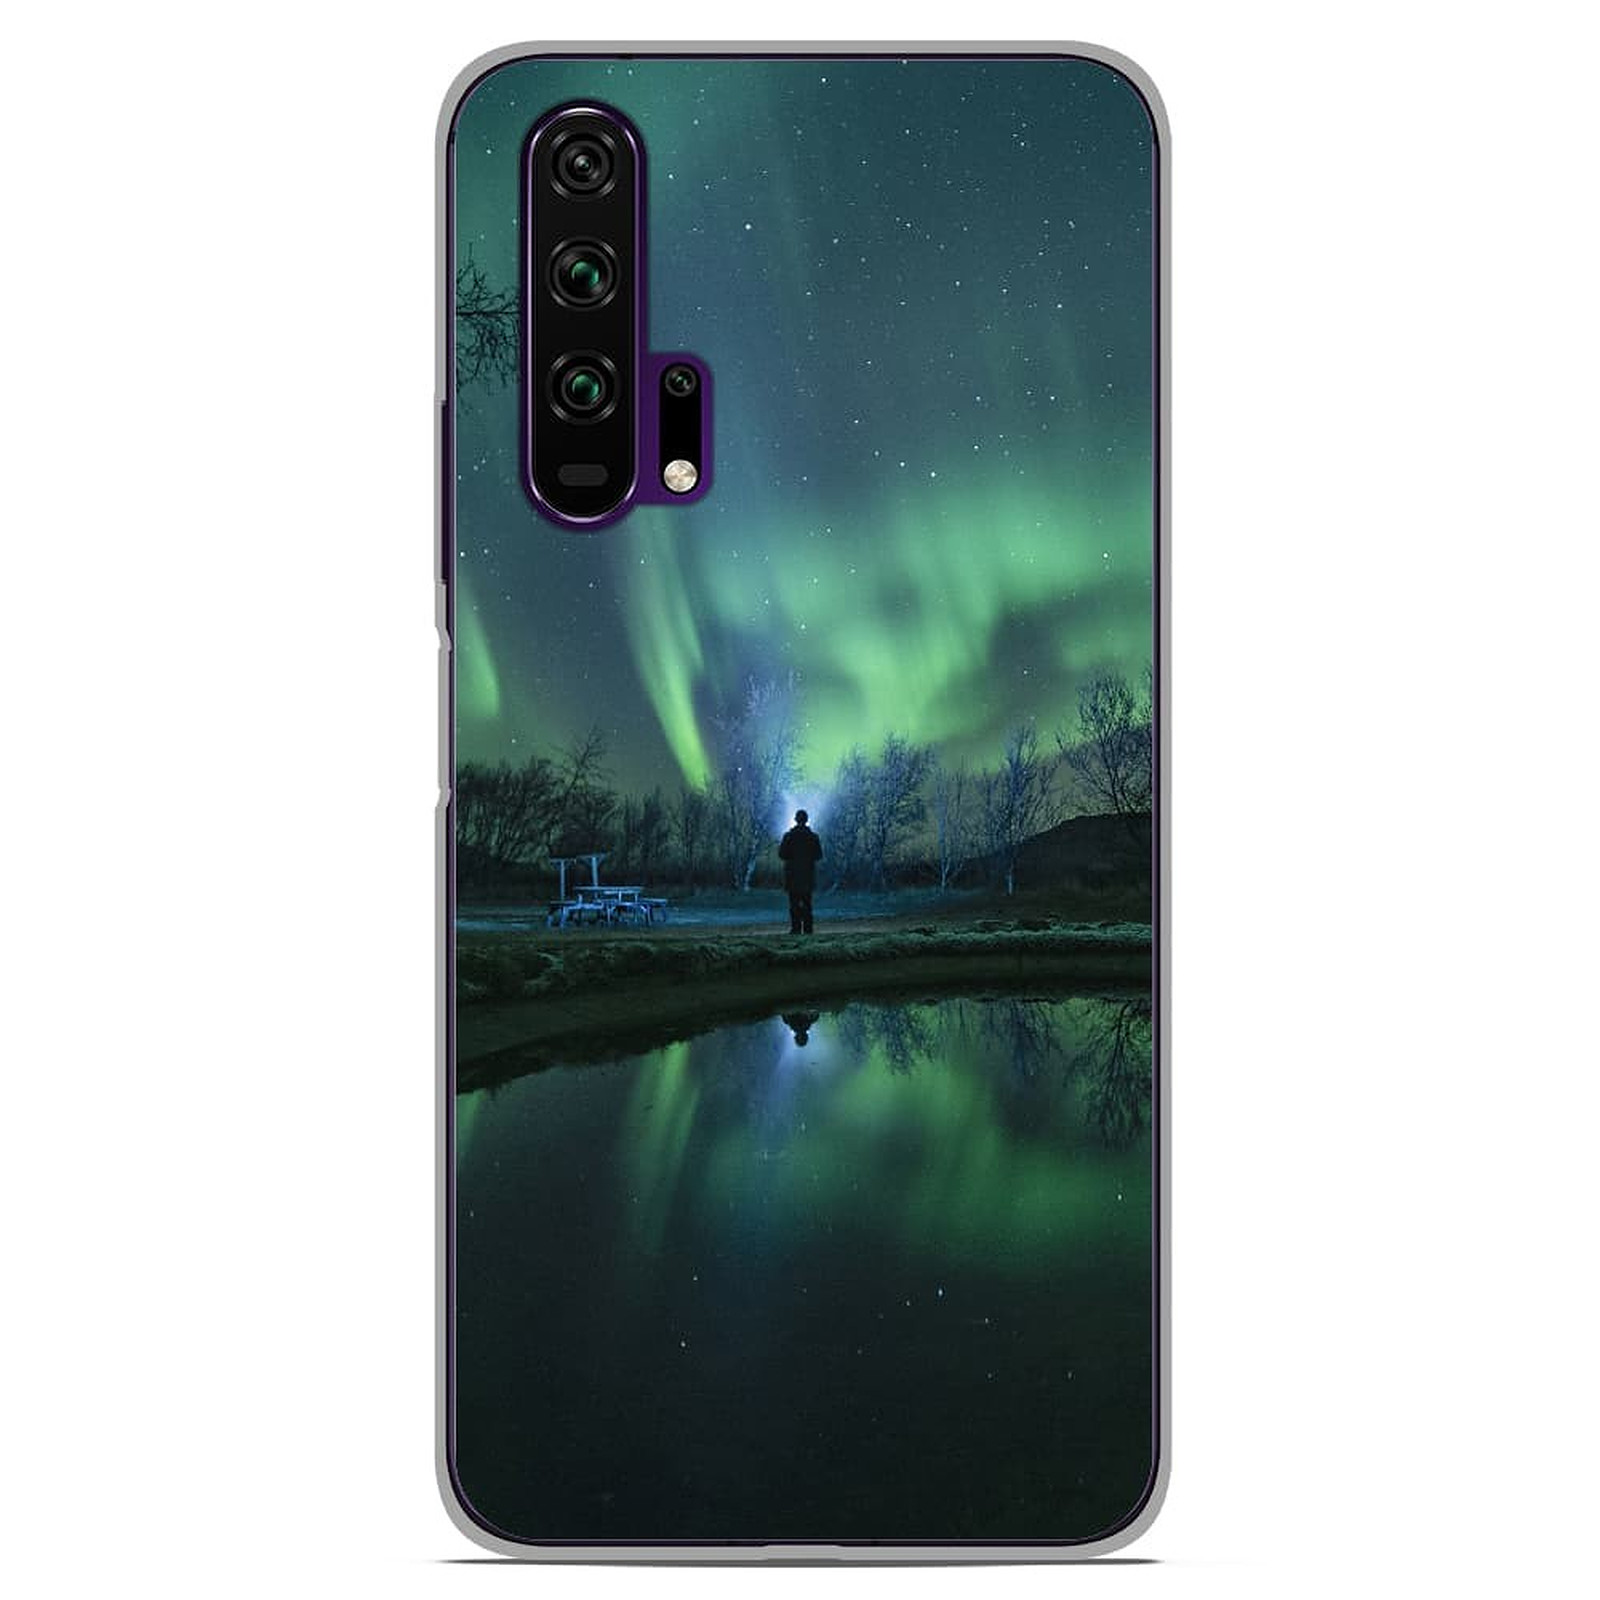 1001 Coques Coque silicone gel Huawei Honor 20 Pro motif Aurores Bore´ales - Coque telephone 1001Coques